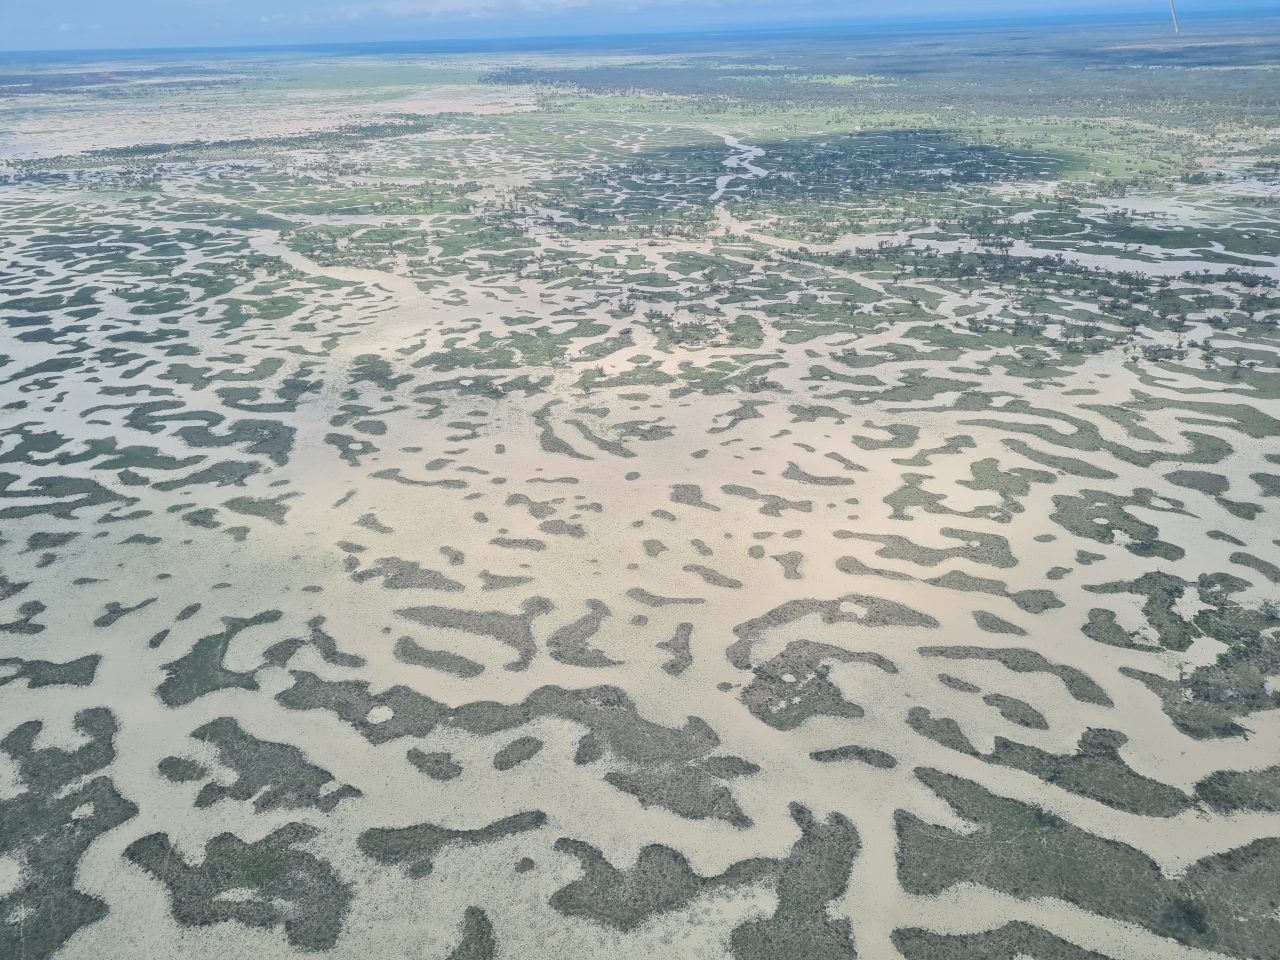 Aerial photo of landscape showing patches of soil where water once pooled due to flooding, making a beautiful pattern with the higher areas that still have vegetation